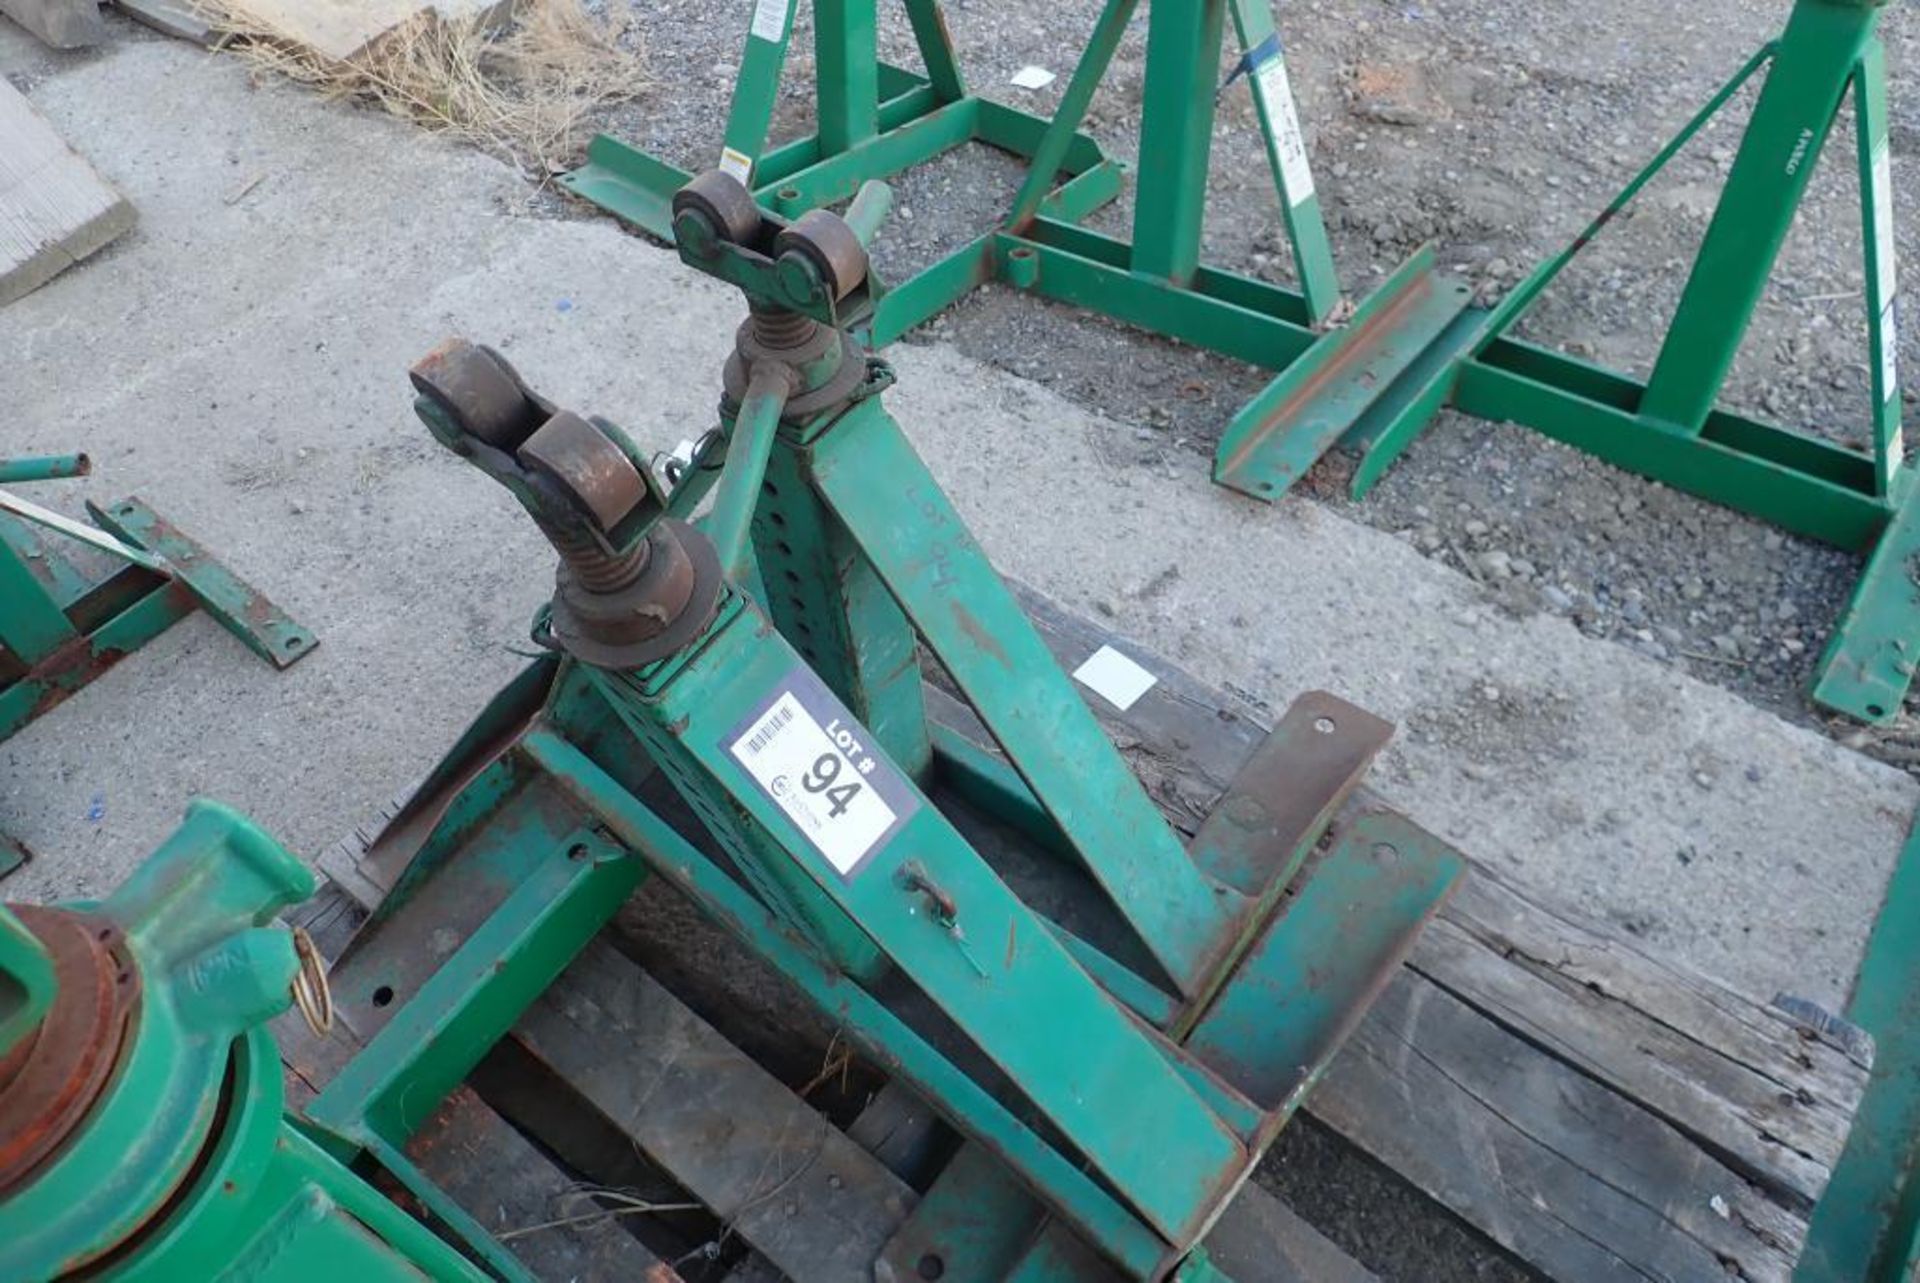 Lot of 2 Greenlee 683 Pipe Stands.